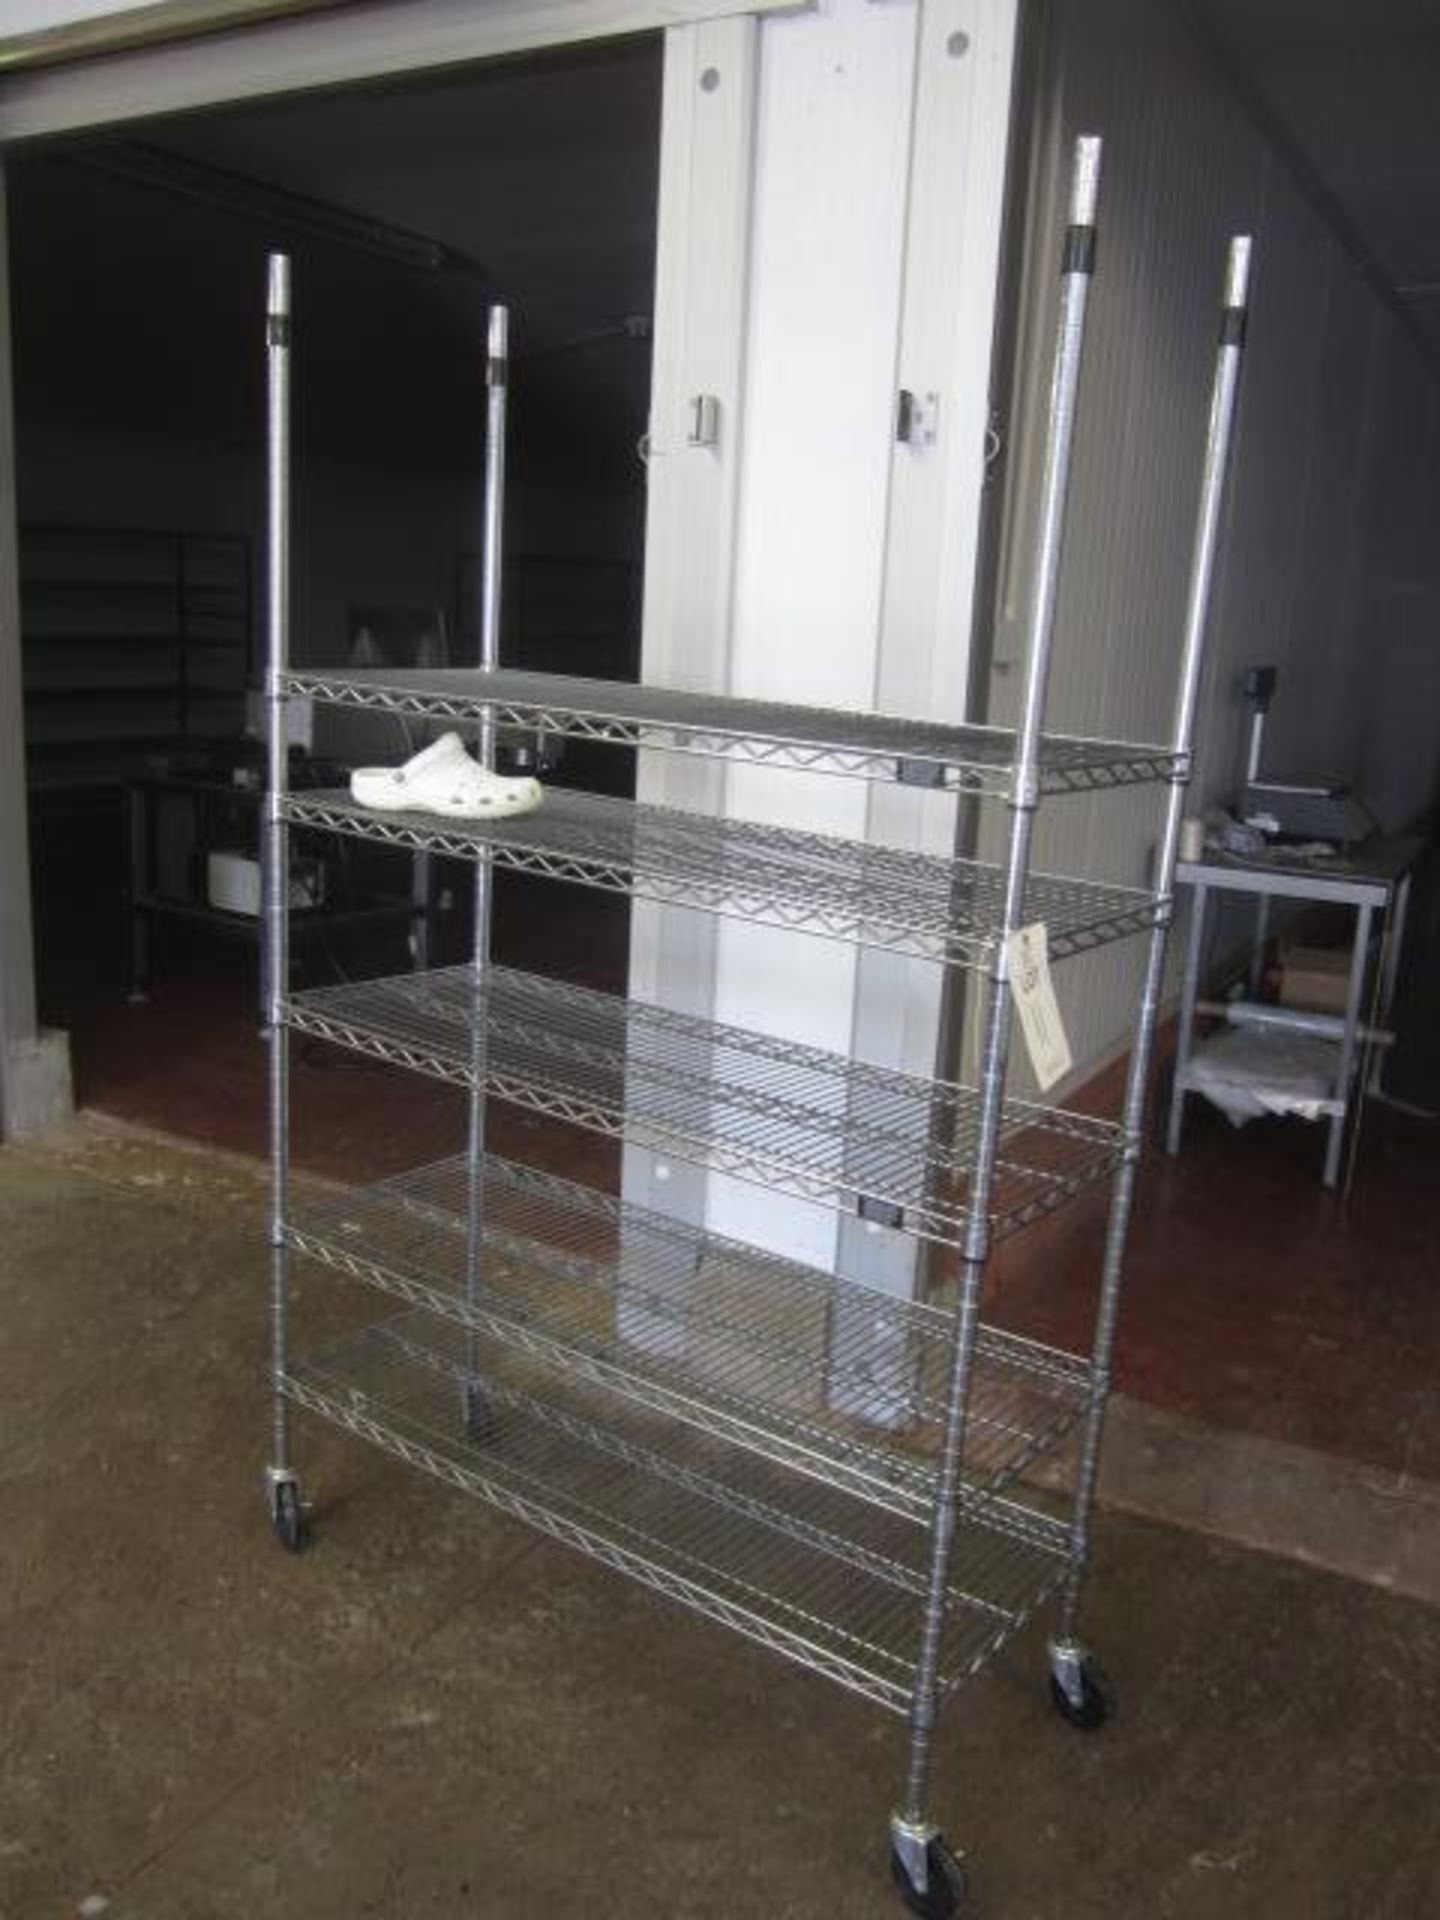 3 x chrome frame 5 & 6 shelf racks, approx. size: 1200mm x 450mm - excluding contents - Image 3 of 3